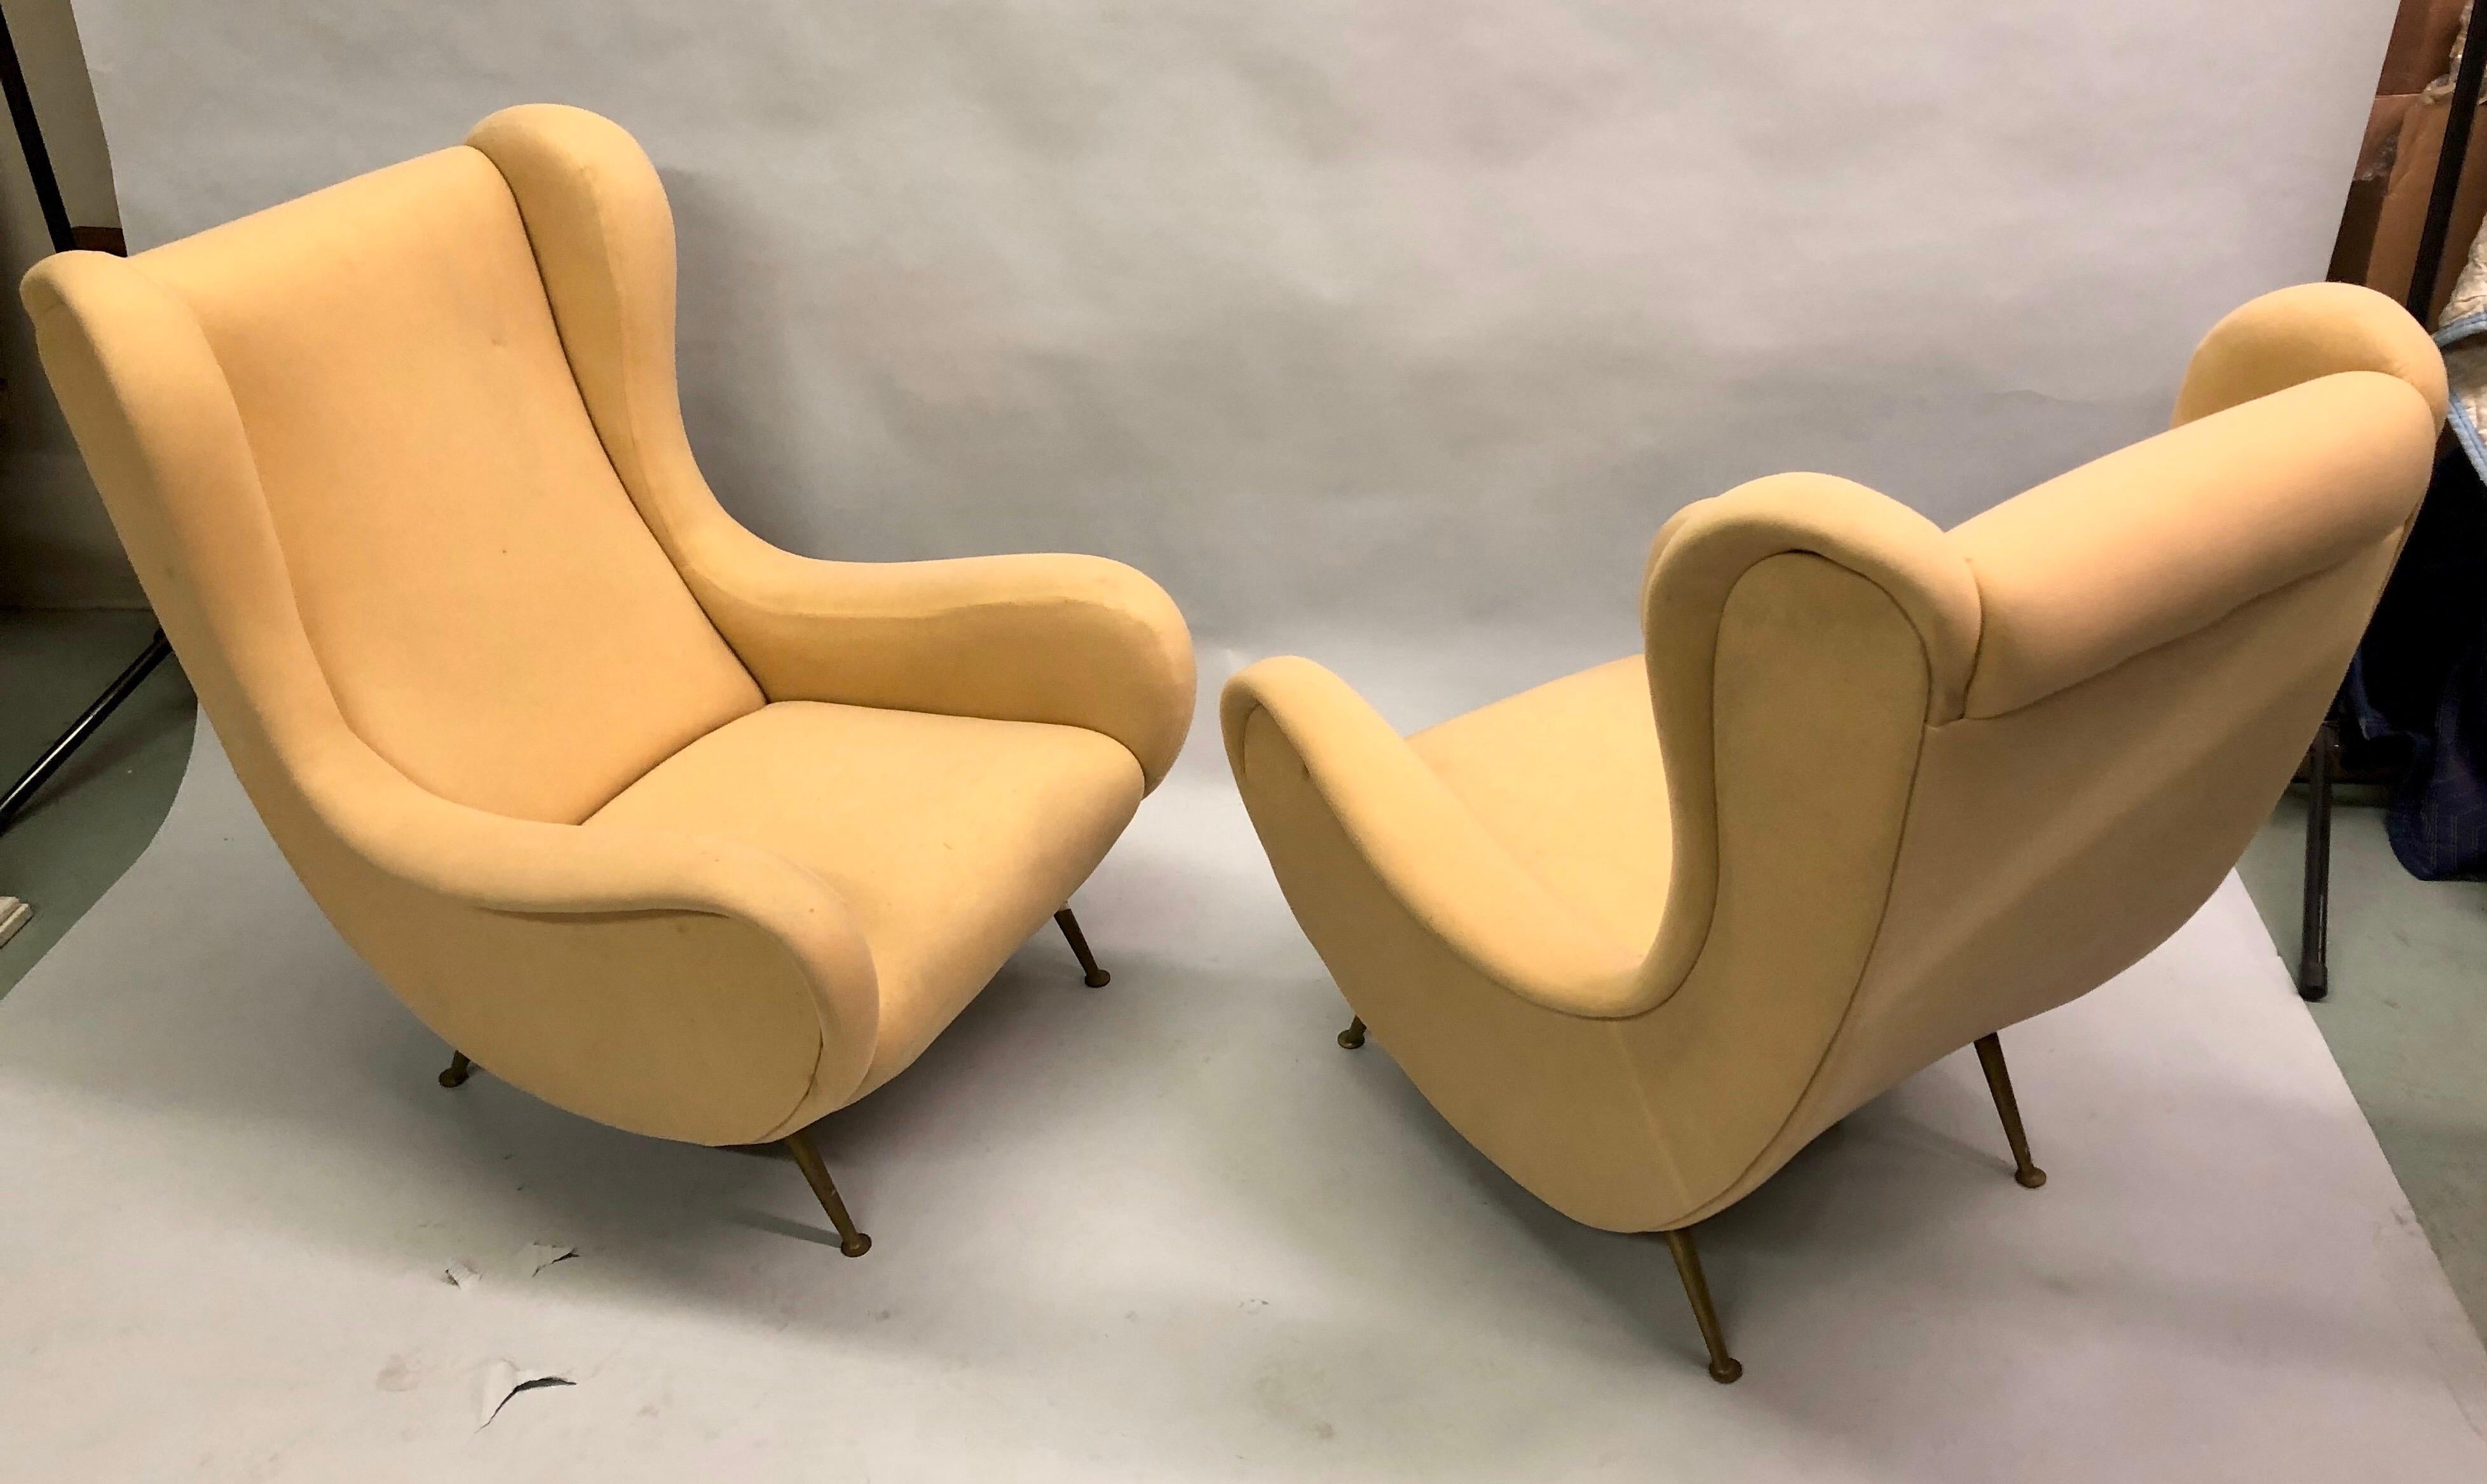 Vintage Pair of Italian 'Senior Chairs' / Lounge Chairs, Marco Zanuso Style In Good Condition For Sale In New York, NY